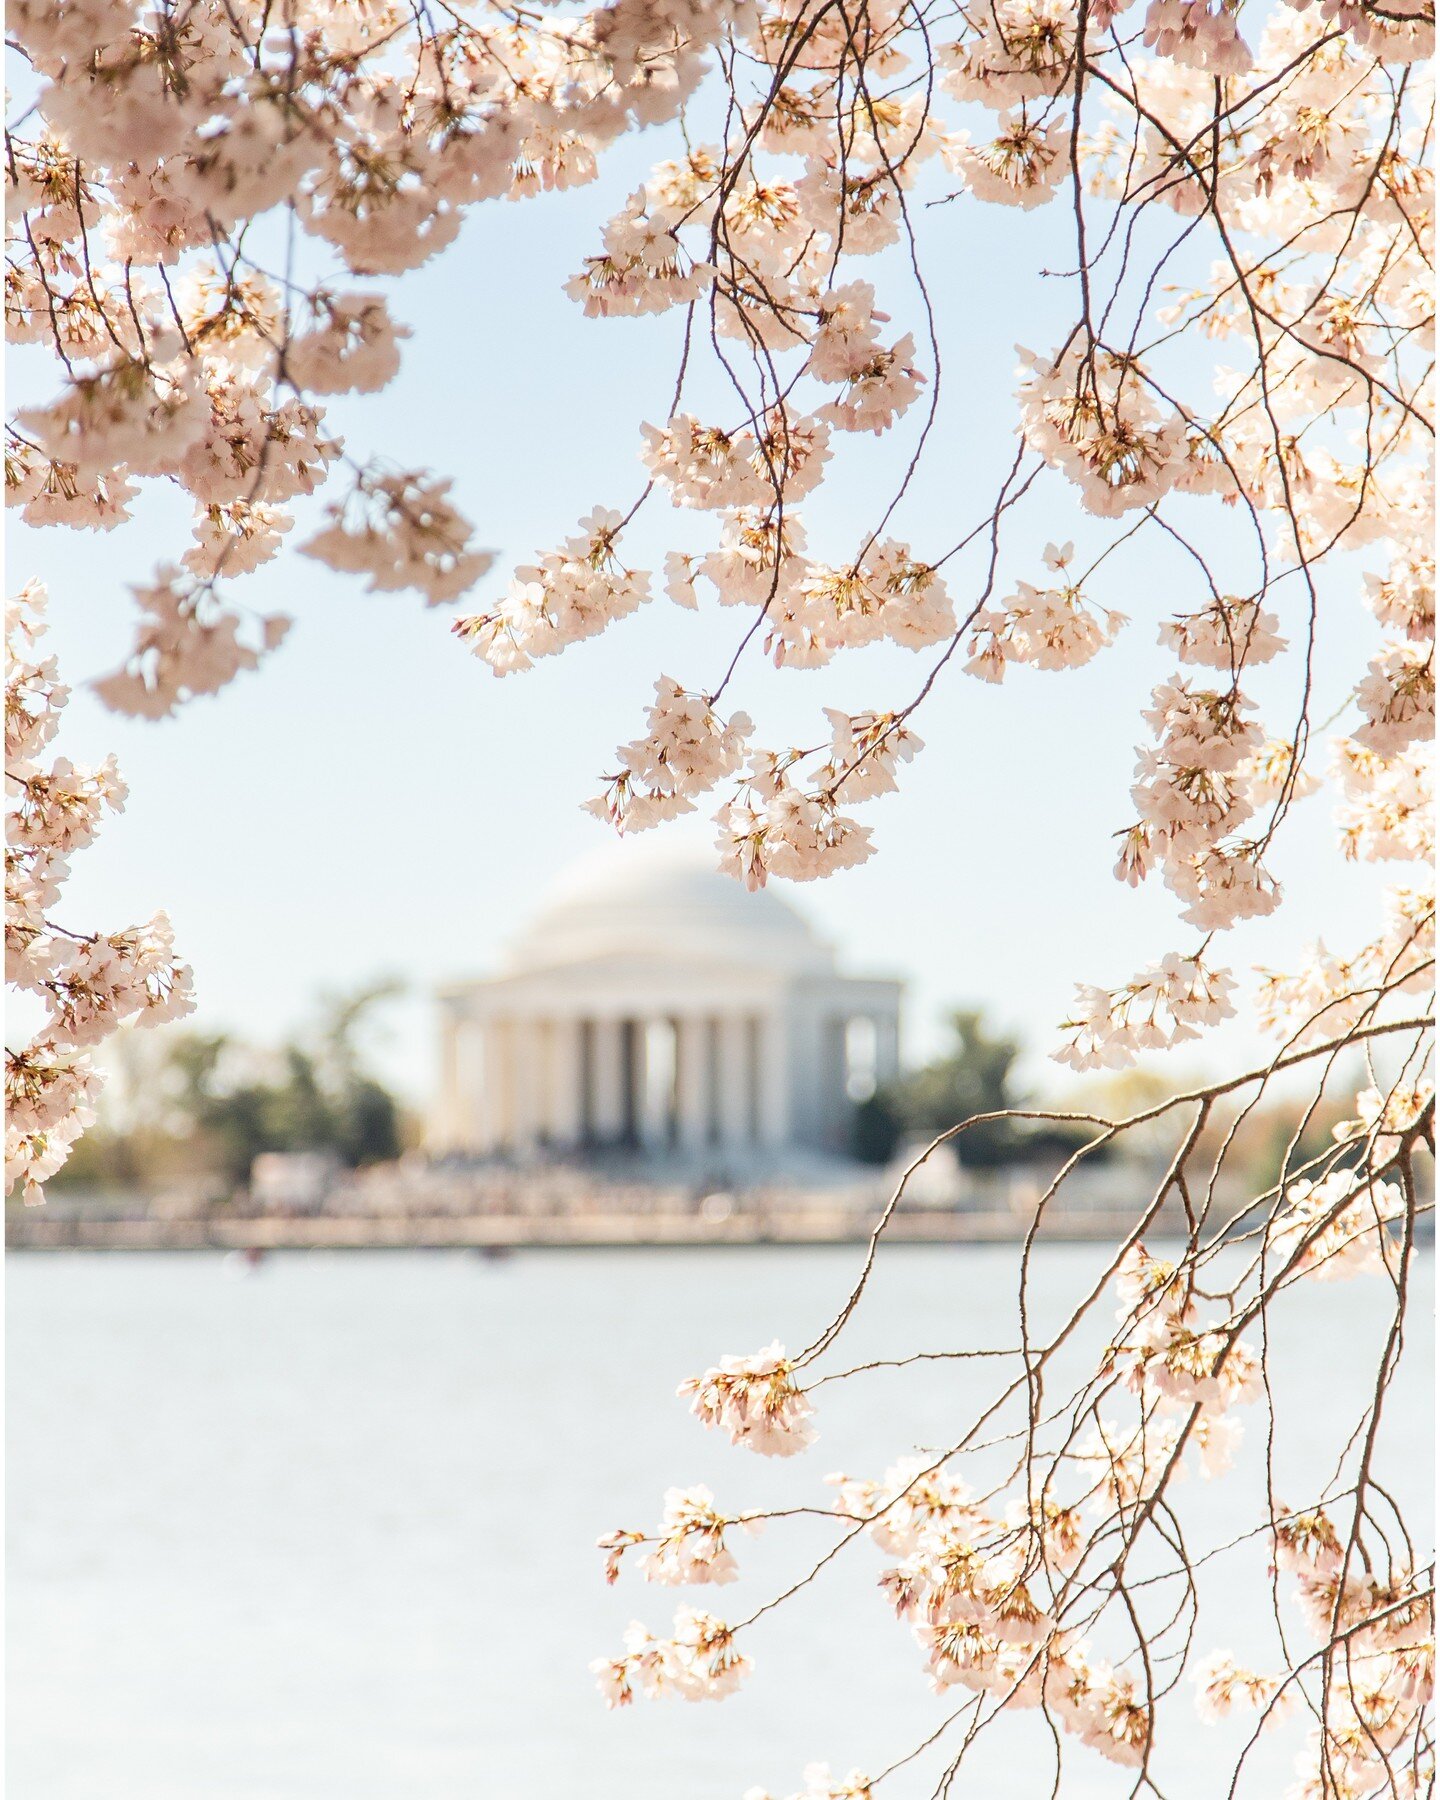 Made it to the iconic blossoms this weekend! Always gorgeous (and always crowded)....last pic shows why I typically avoid all this, but it is beautiful! 

.
.
.
.
.
#ginnyfilerphotography #igdc #washingtondc #dmvfamilyphotographer #washpost #huffpost